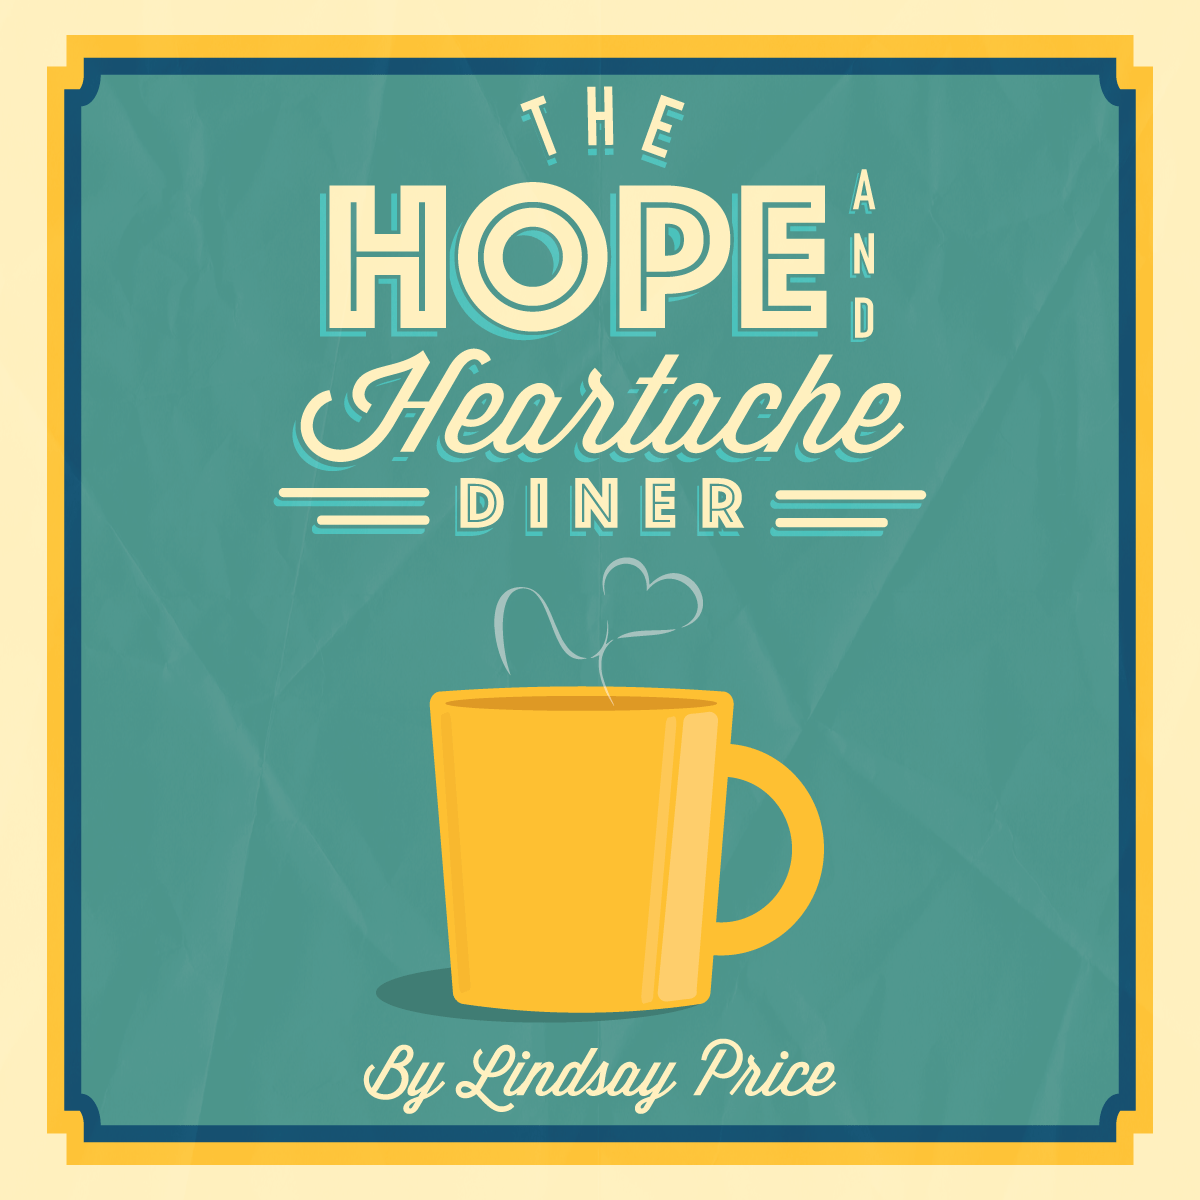 The Hope and Heartache Diner